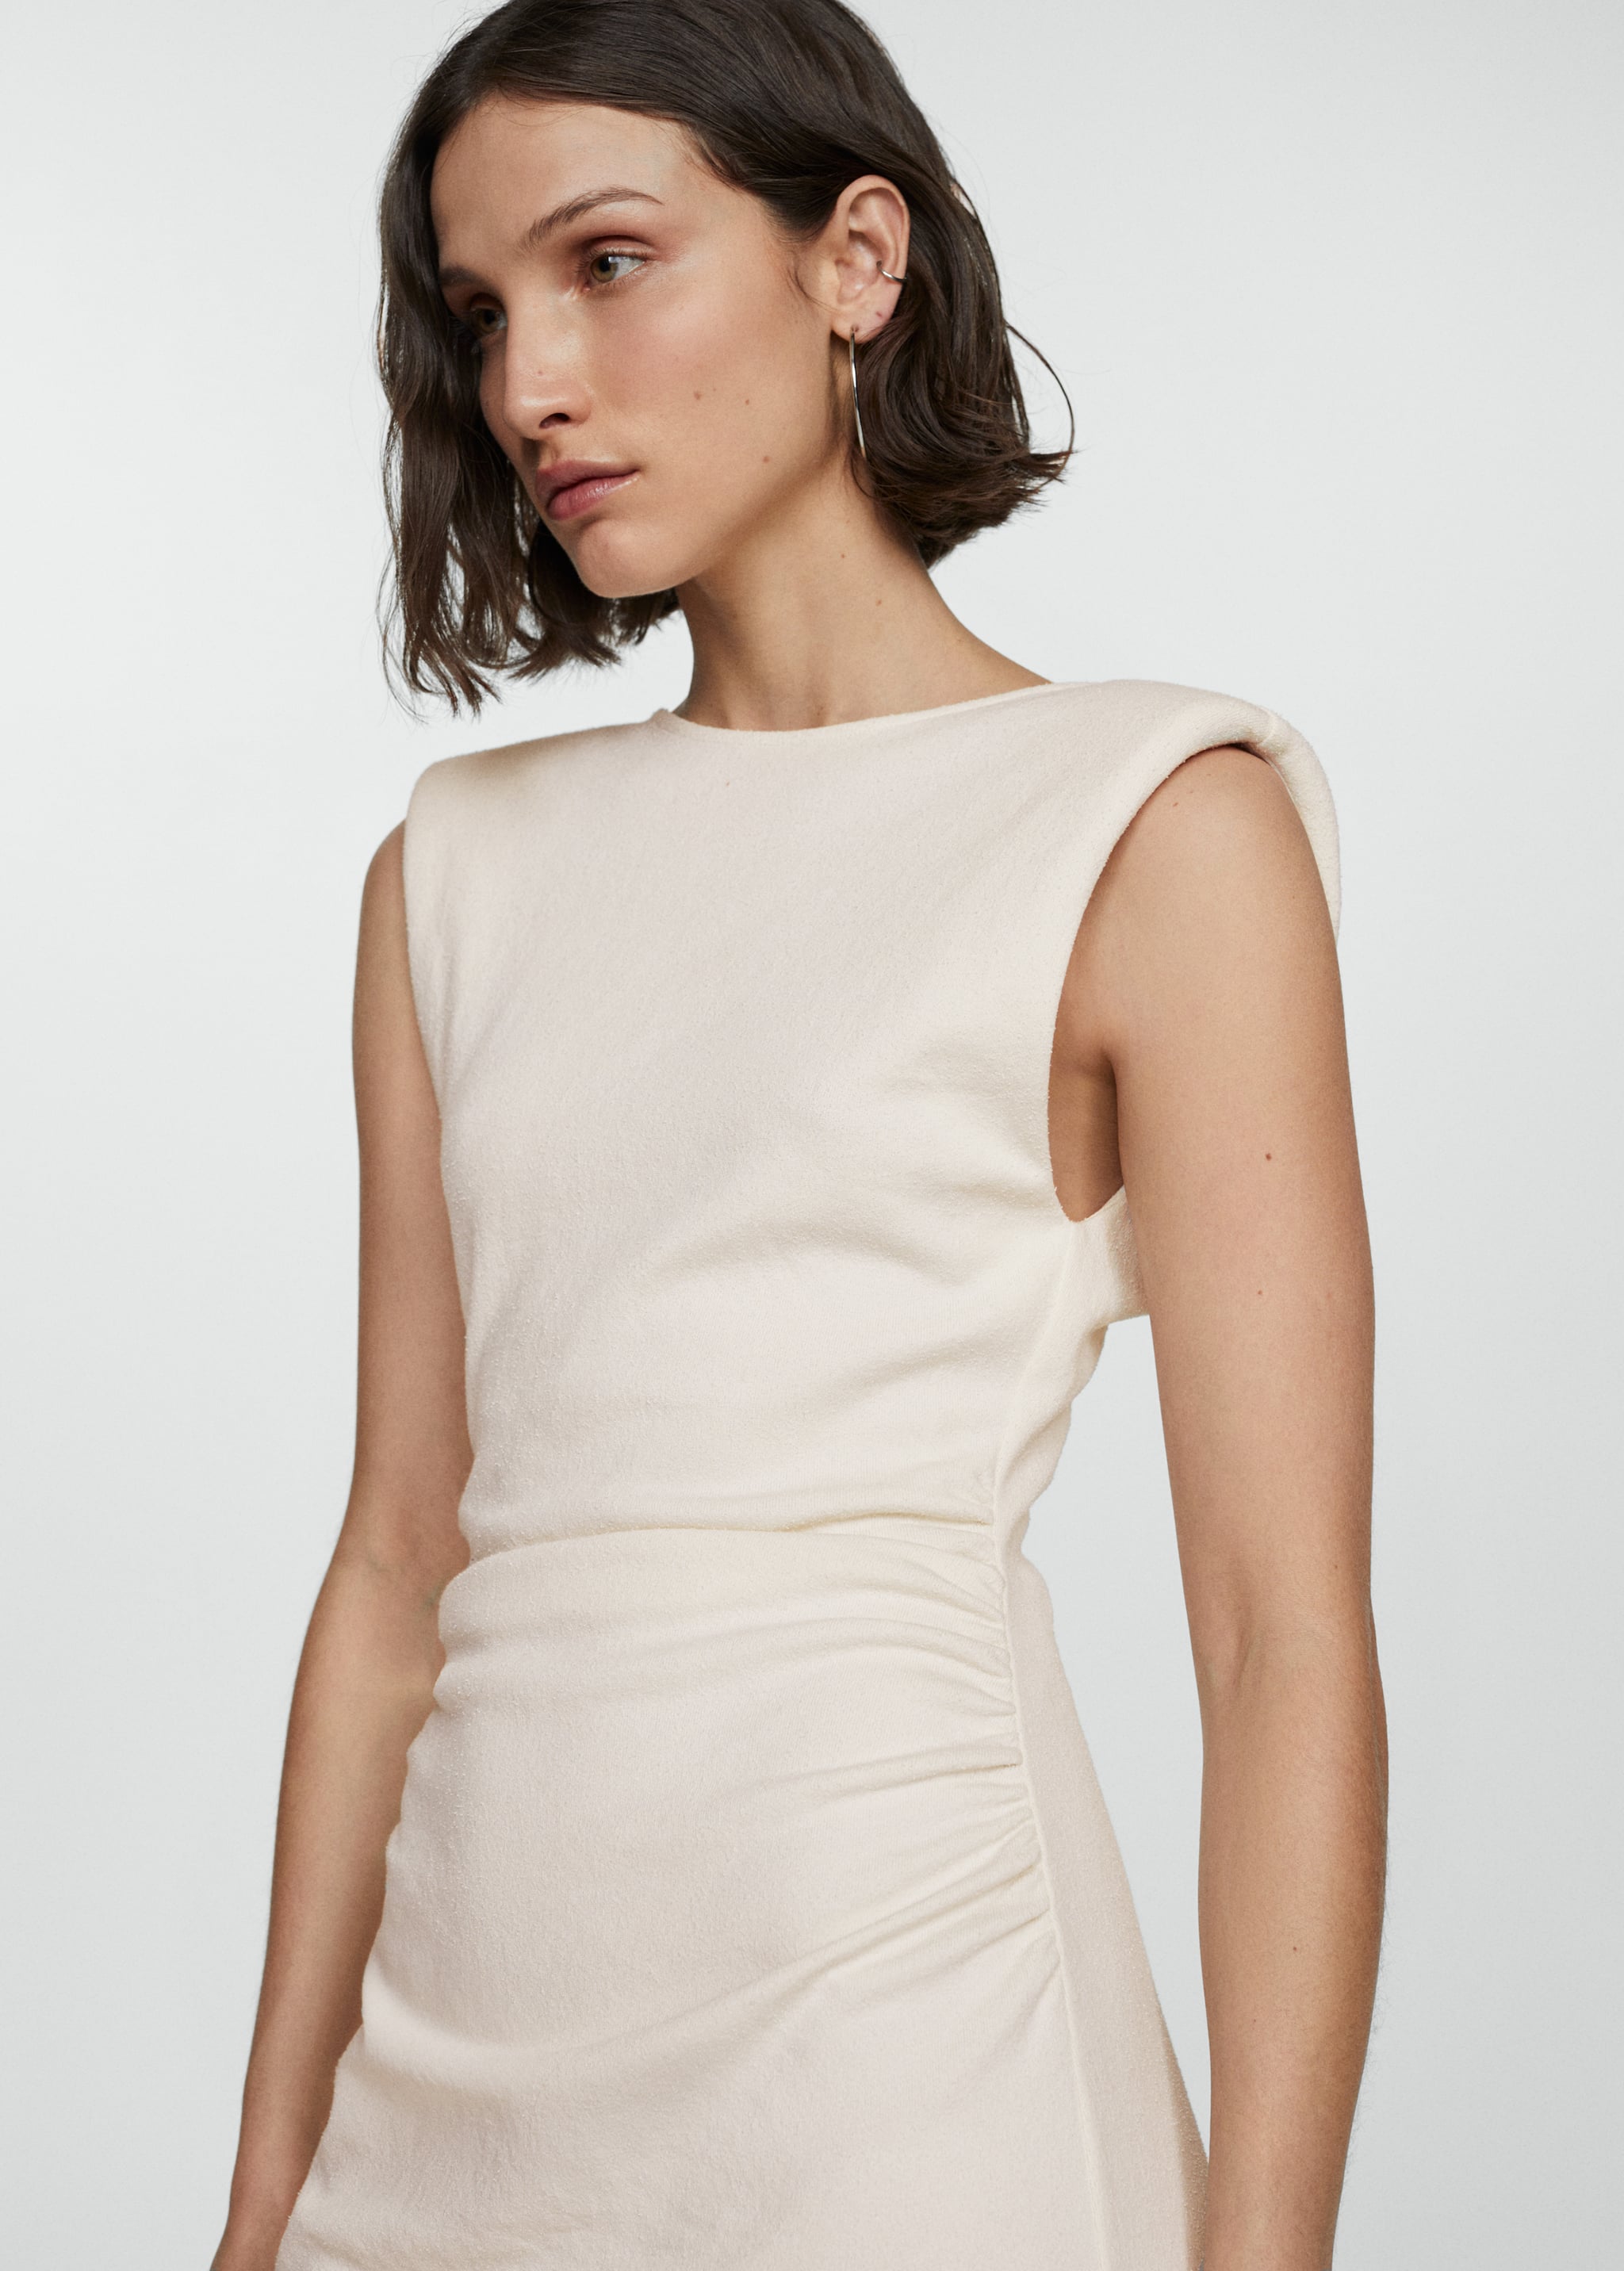 Draped details dress - Details of the article 1